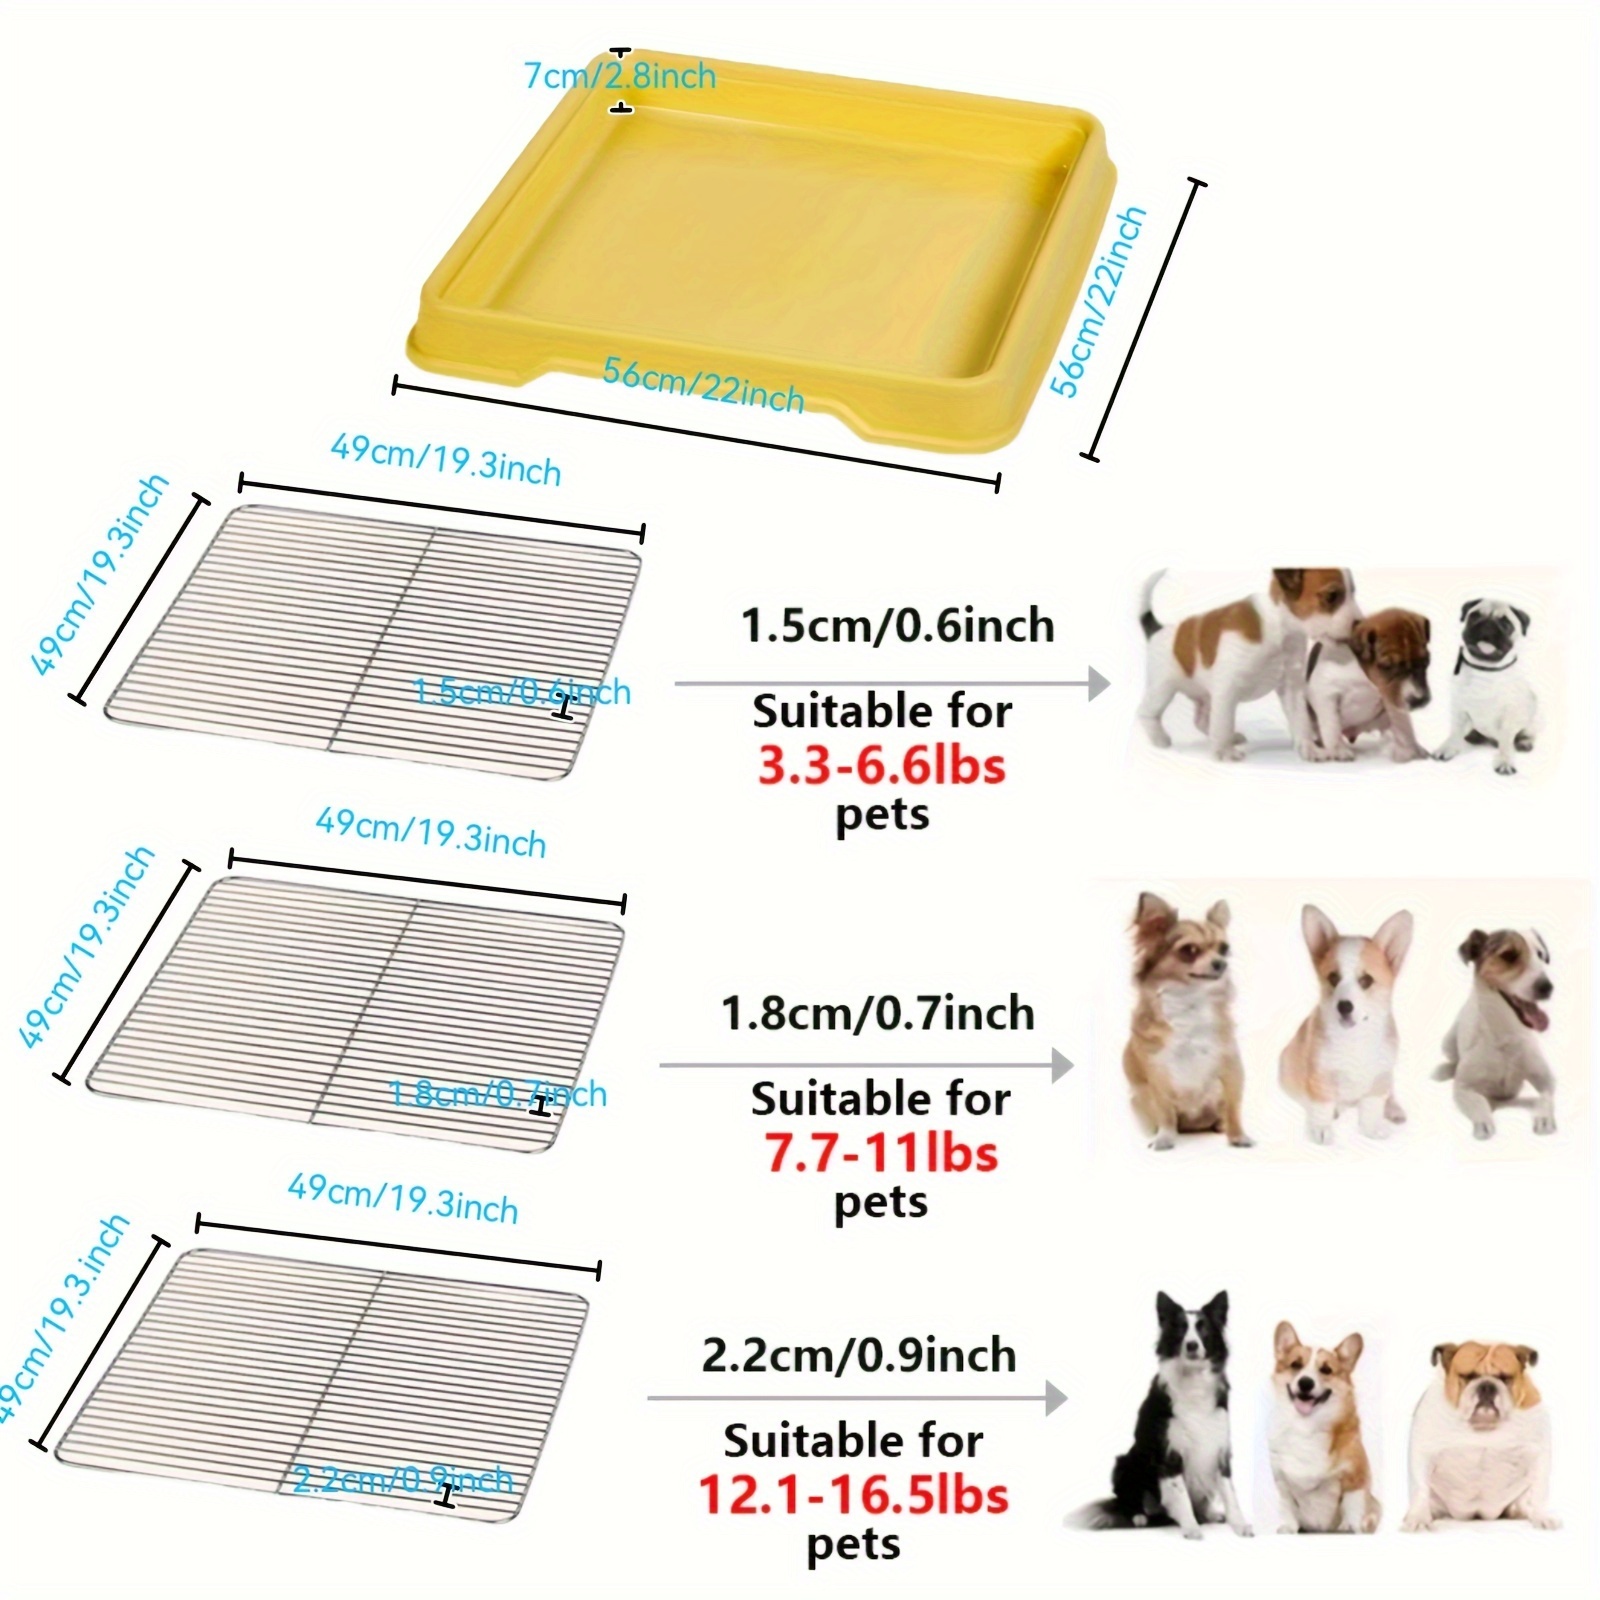 Plastic Tray for Indoor Dog Potty